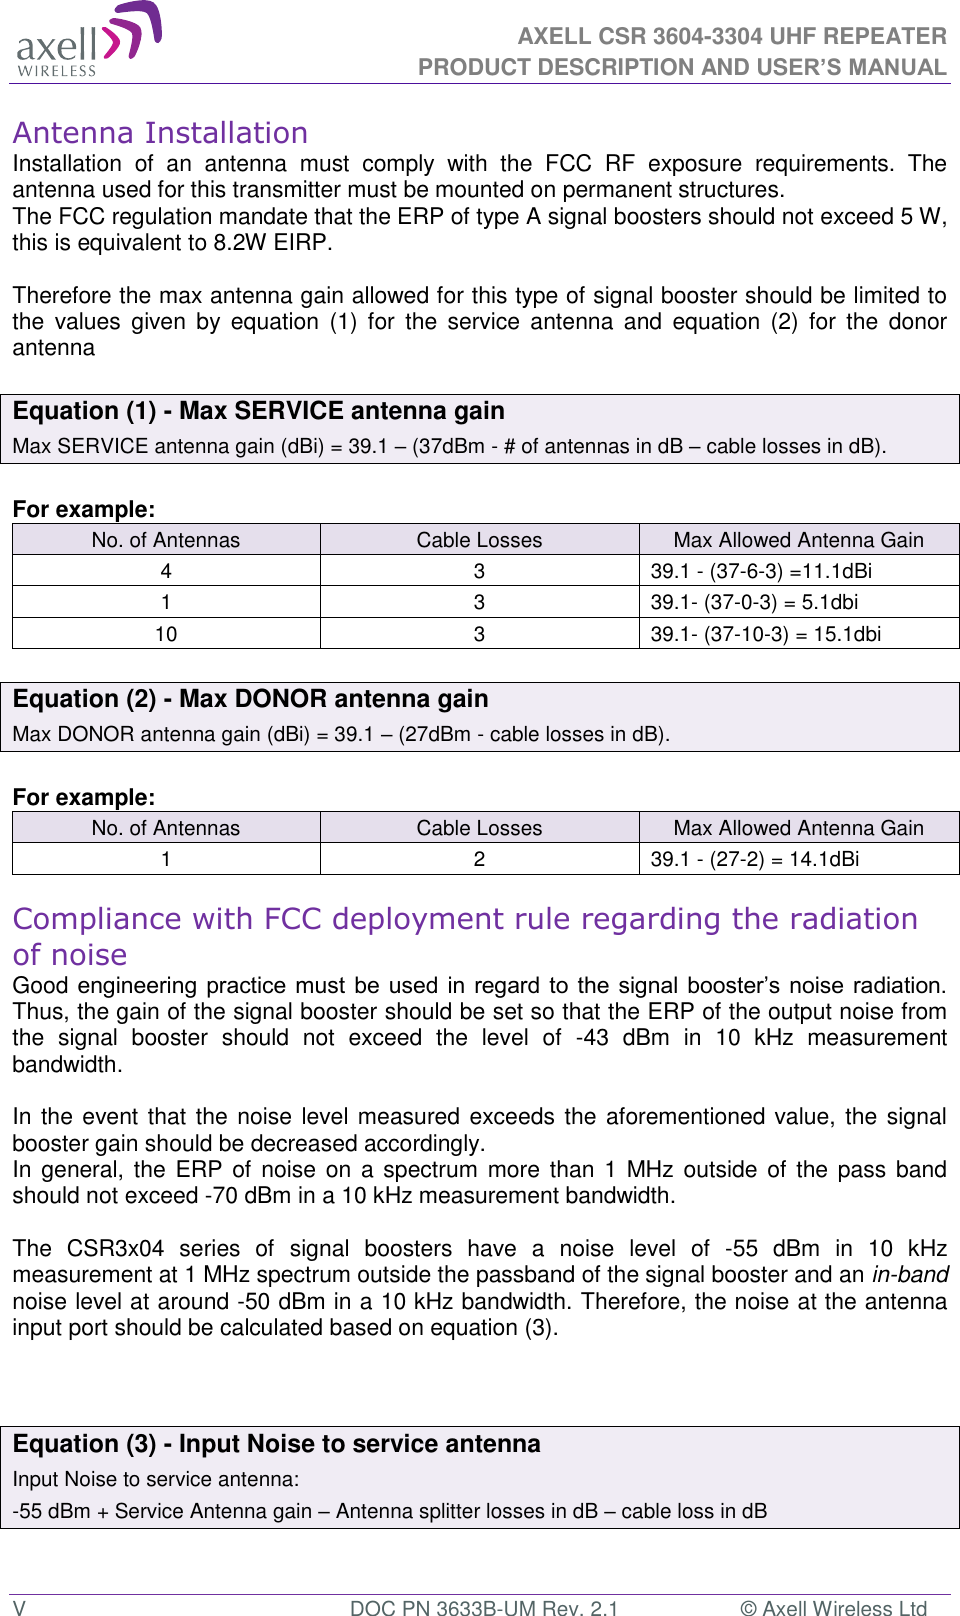  AXELL CSR 3604-3304 UHF REPEATER PRODUCT DESCRIPTION AND USER’S MANUAL  V  DOC PN 3633B-UM Rev. 2.1  © Axell Wireless Ltd Antenna Installation Installation  of  an  antenna  must  comply  with  the  FCC  RF  exposure  requirements.  The antenna used for this transmitter must be mounted on permanent structures.   The FCC regulation mandate that the ERP of type A signal boosters should not exceed 5 W, this is equivalent to 8.2W EIRP.  Therefore the max antenna gain allowed for this type of signal booster should be limited to the  values  given  by  equation  (1)  for  the  service  antenna  and  equation  (2)  for  the  donor antenna   Equation (1) - Max SERVICE antenna gain Max SERVICE antenna gain (dBi) = 39.1 – (37dBm - # of antennas in dB – cable losses in dB).  For example: No. of Antennas Cable Losses Max Allowed Antenna Gain 4 3 39.1 - (37-6-3) =11.1dBi 1 3 39.1- (37-0-3) = 5.1dbi 10 3 39.1- (37-10-3) = 15.1dbi  Equation (2) - Max DONOR antenna gain Max DONOR antenna gain (dBi) = 39.1 – (27dBm - cable losses in dB).  For example: No. of Antennas Cable Losses Max Allowed Antenna Gain 1 2 39.1 - (27-2) = 14.1dBi  Compliance with FCC deployment rule regarding the radiation of noise  Good engineering practice must  be used in regard to  the signal booster’s noise radiation. Thus, the gain of the signal booster should be set so that the ERP of the output noise from the  signal  booster  should  not  exceed  the  level  of  -43  dBm  in  10  kHz  measurement bandwidth.  In the event that the noise level measured exceeds the aforementioned value, the signal booster gain should be decreased accordingly. In general, the ERP of  noise on  a spectrum more  than  1 MHz outside of the pass band should not exceed -70 dBm in a 10 kHz measurement bandwidth.  The  CSR3x04  series  of  signal  boosters  have  a  noise  level  of  -55  dBm  in  10  kHz measurement at 1 MHz spectrum outside the passband of the signal booster and an in-band noise level at around -50 dBm in a 10 kHz bandwidth. Therefore, the noise at the antenna input port should be calculated based on equation (3).     Equation (3) - Input Noise to service antenna Input Noise to service antenna: -55 dBm + Service Antenna gain – Antenna splitter losses in dB – cable loss in dB  